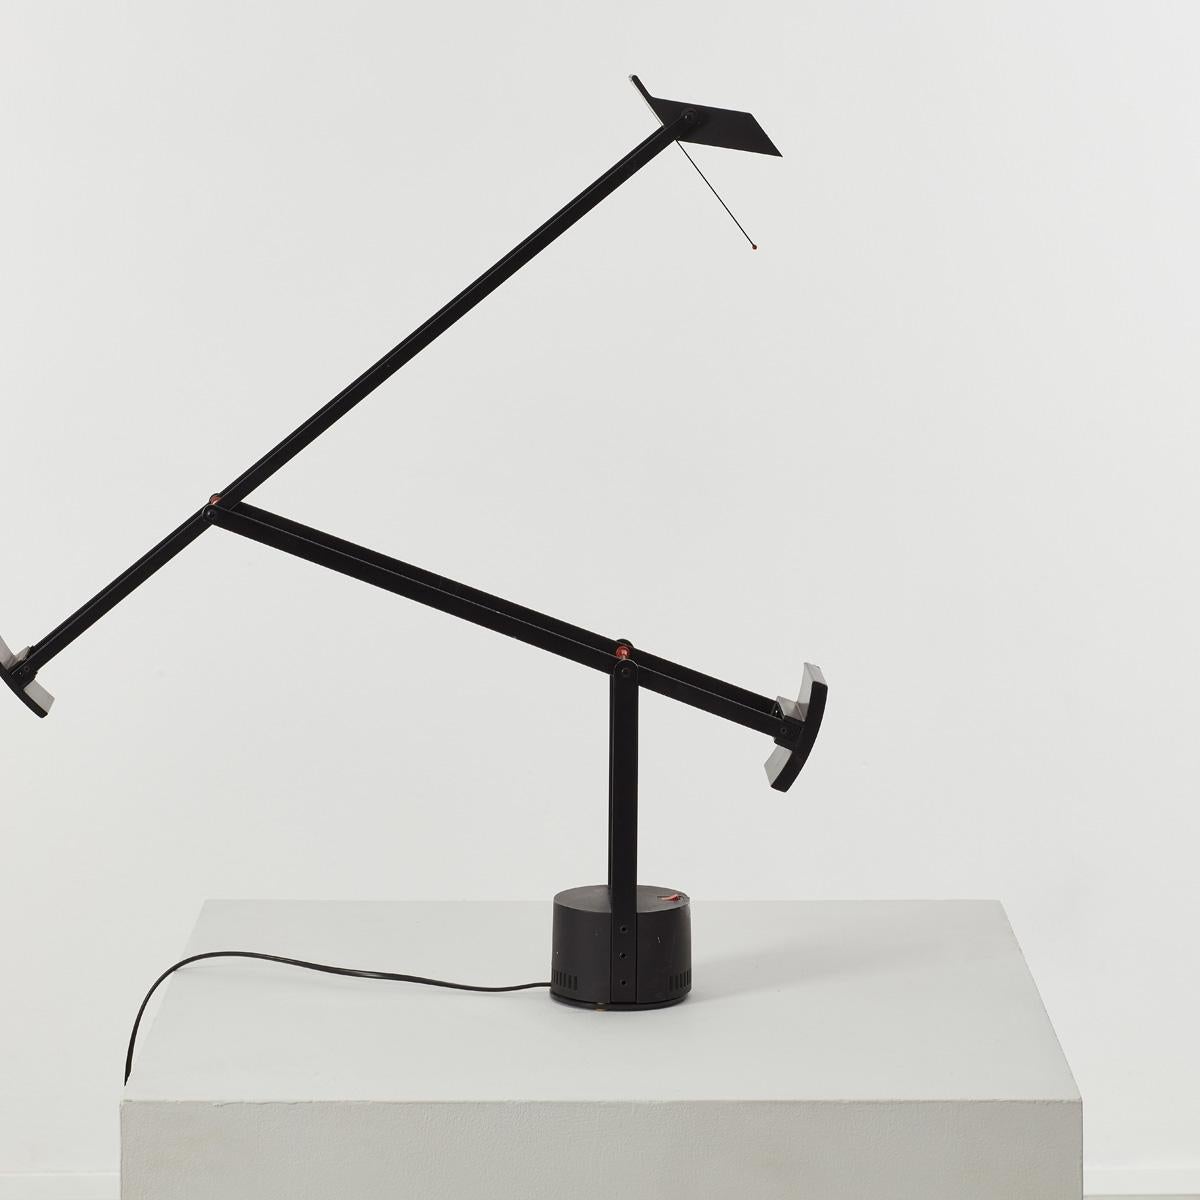 Richard Sapper (1932-2015) was born in German but worked in Italy, and his work brings together the best design principles of both nations. On one hand the ‘Tizio’ lamp possesses a northern European emphasis on functionalism. It was conceived as the